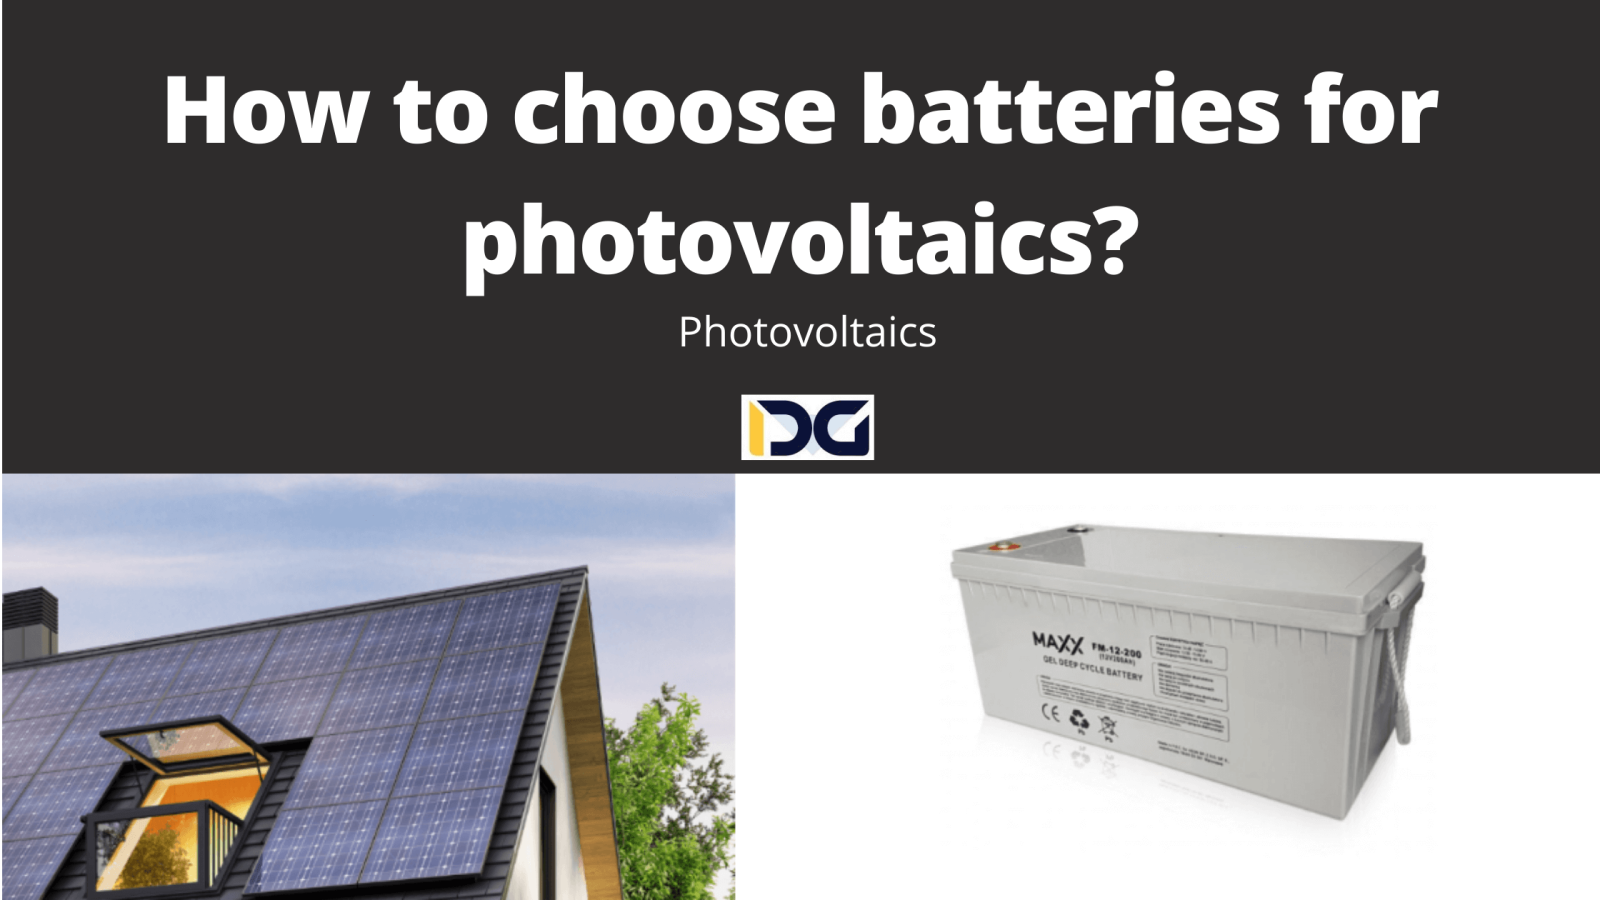 How to choose batteries for photovoltaics